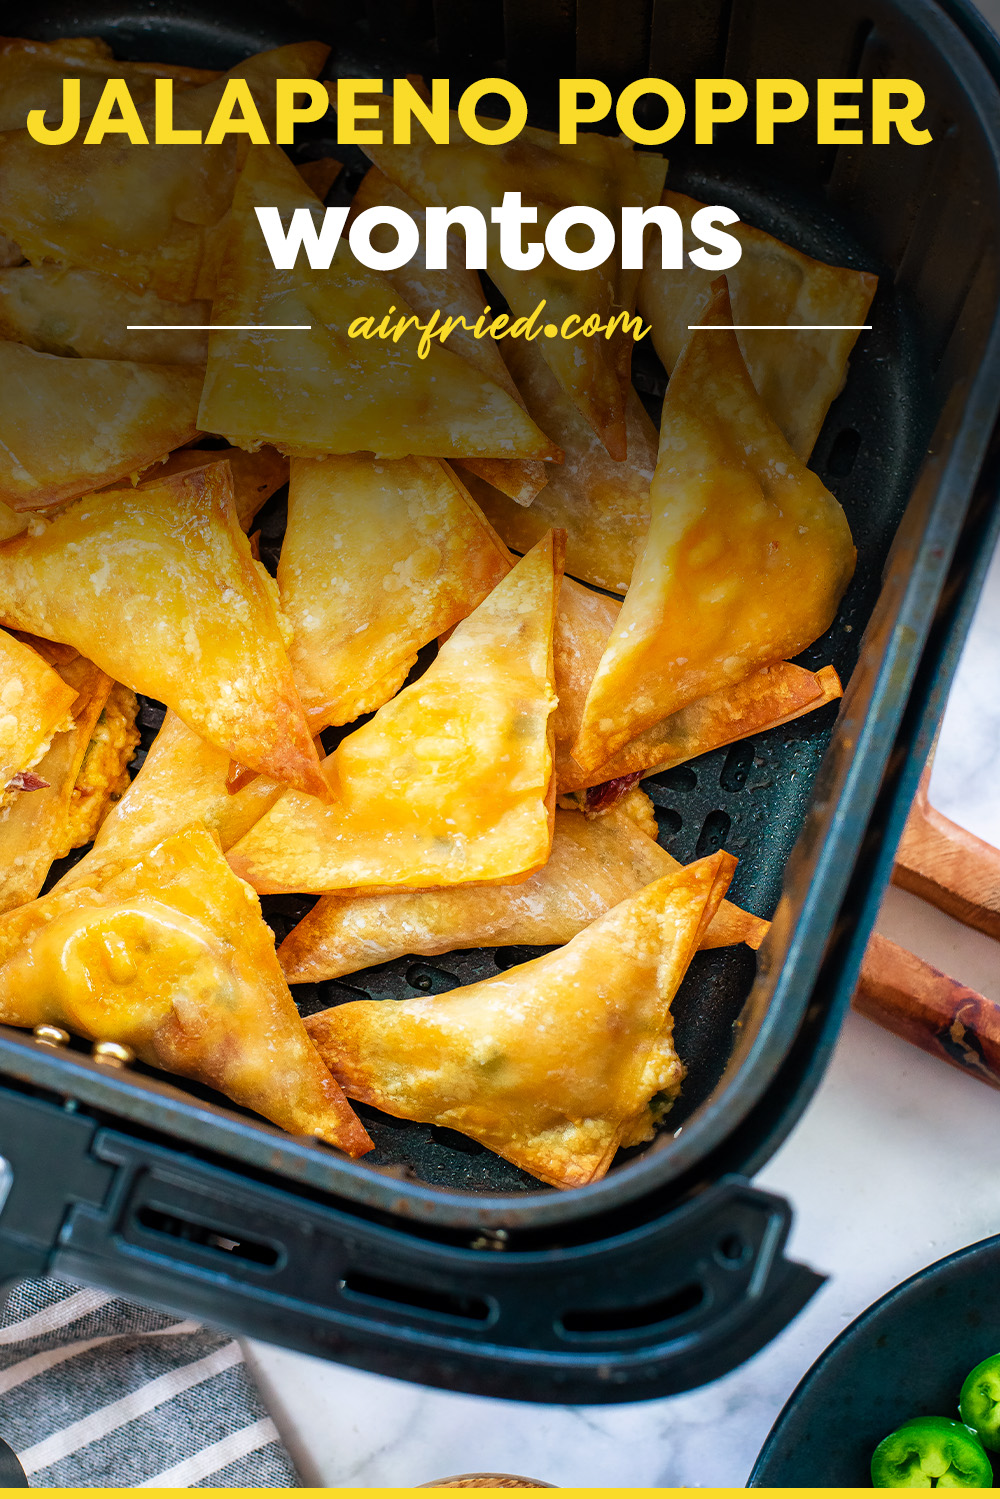 These jalapeno popper wontons are super crisp shells filled with the sweet and spicy popper filling!  Great finger food appetizers for your next gathering!